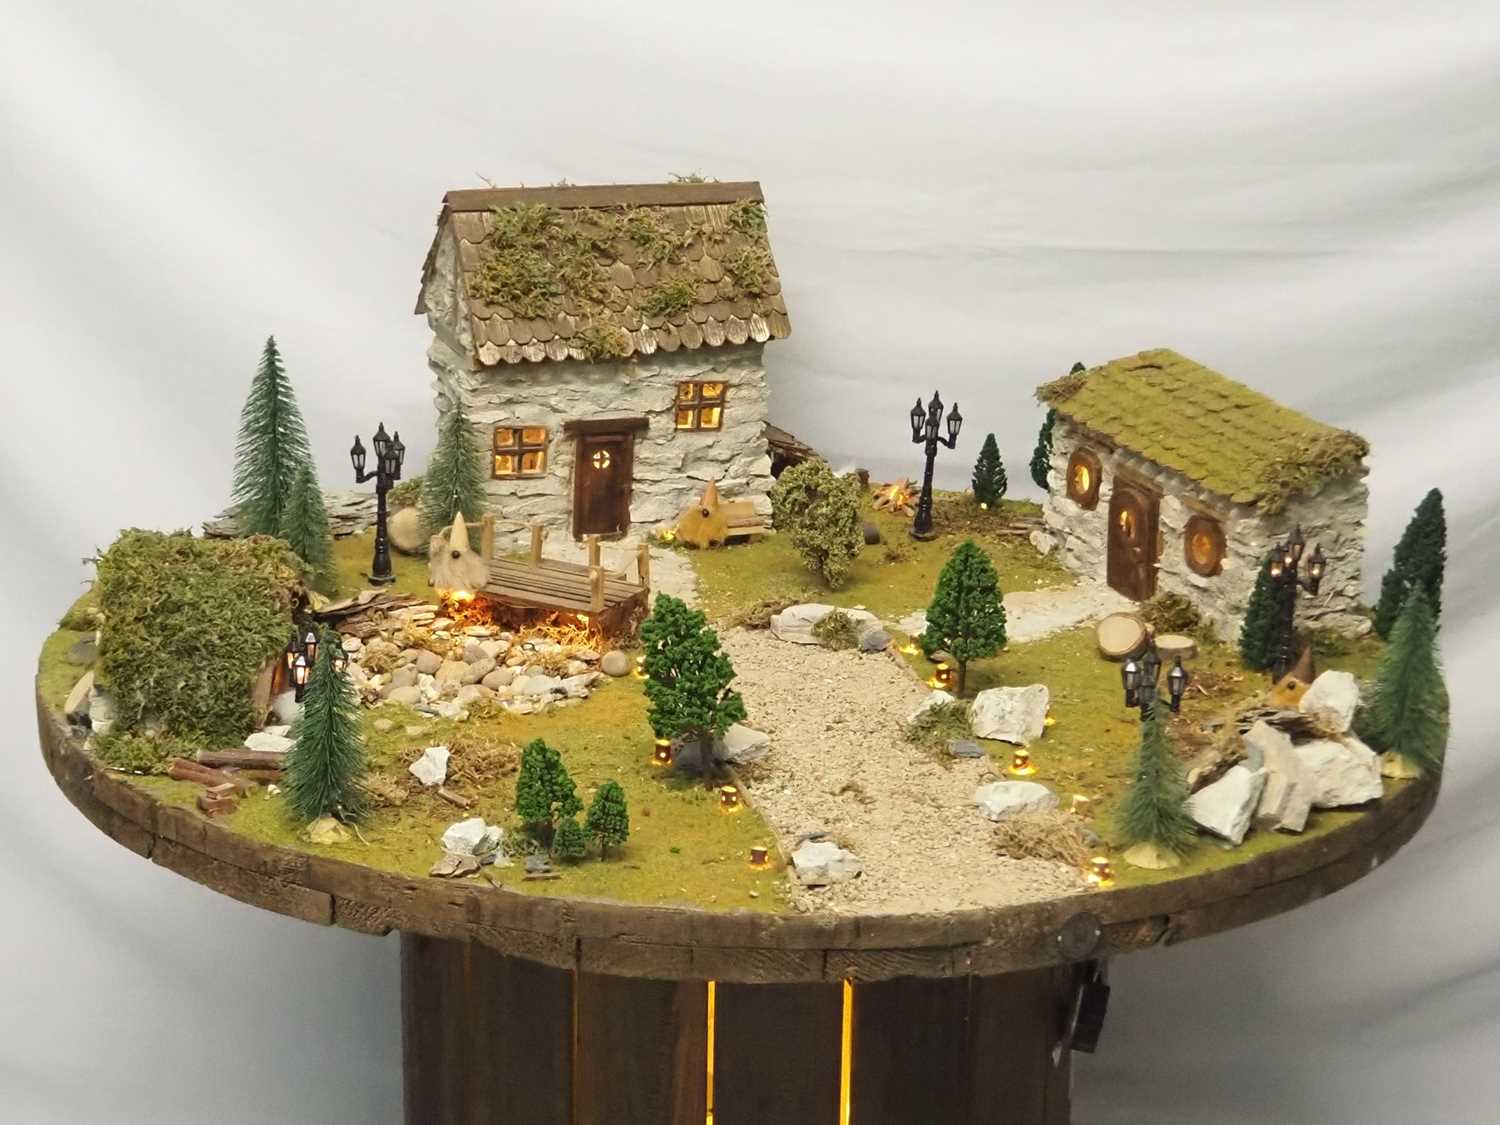 Nick Zammeti cable reel table top model hamlet diorama - Nick says 'How can you make a Miniature - Image 7 of 12